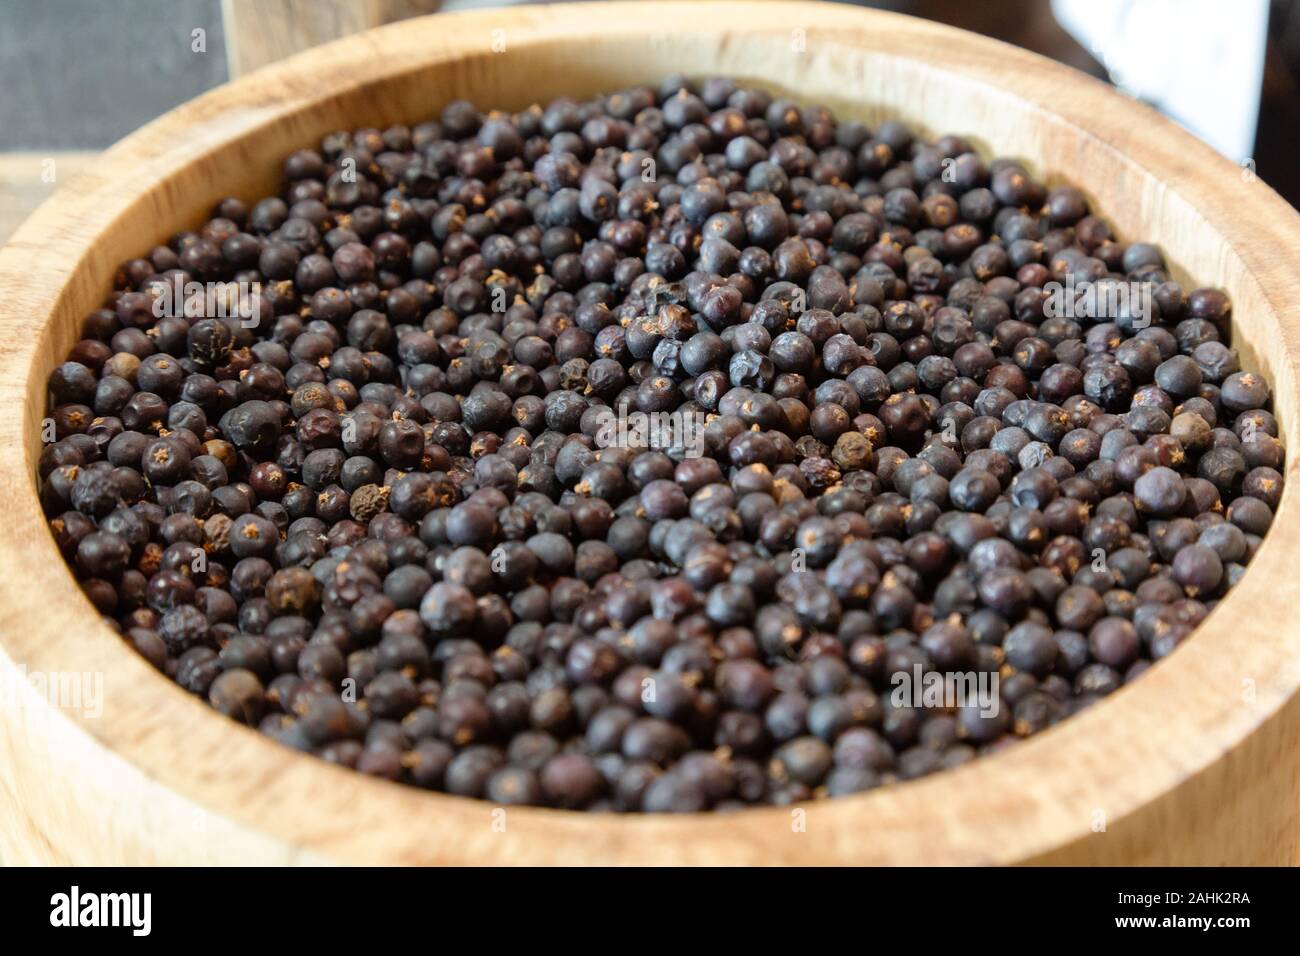 A bowl of Juniper berries used to make Gin Stock Photo